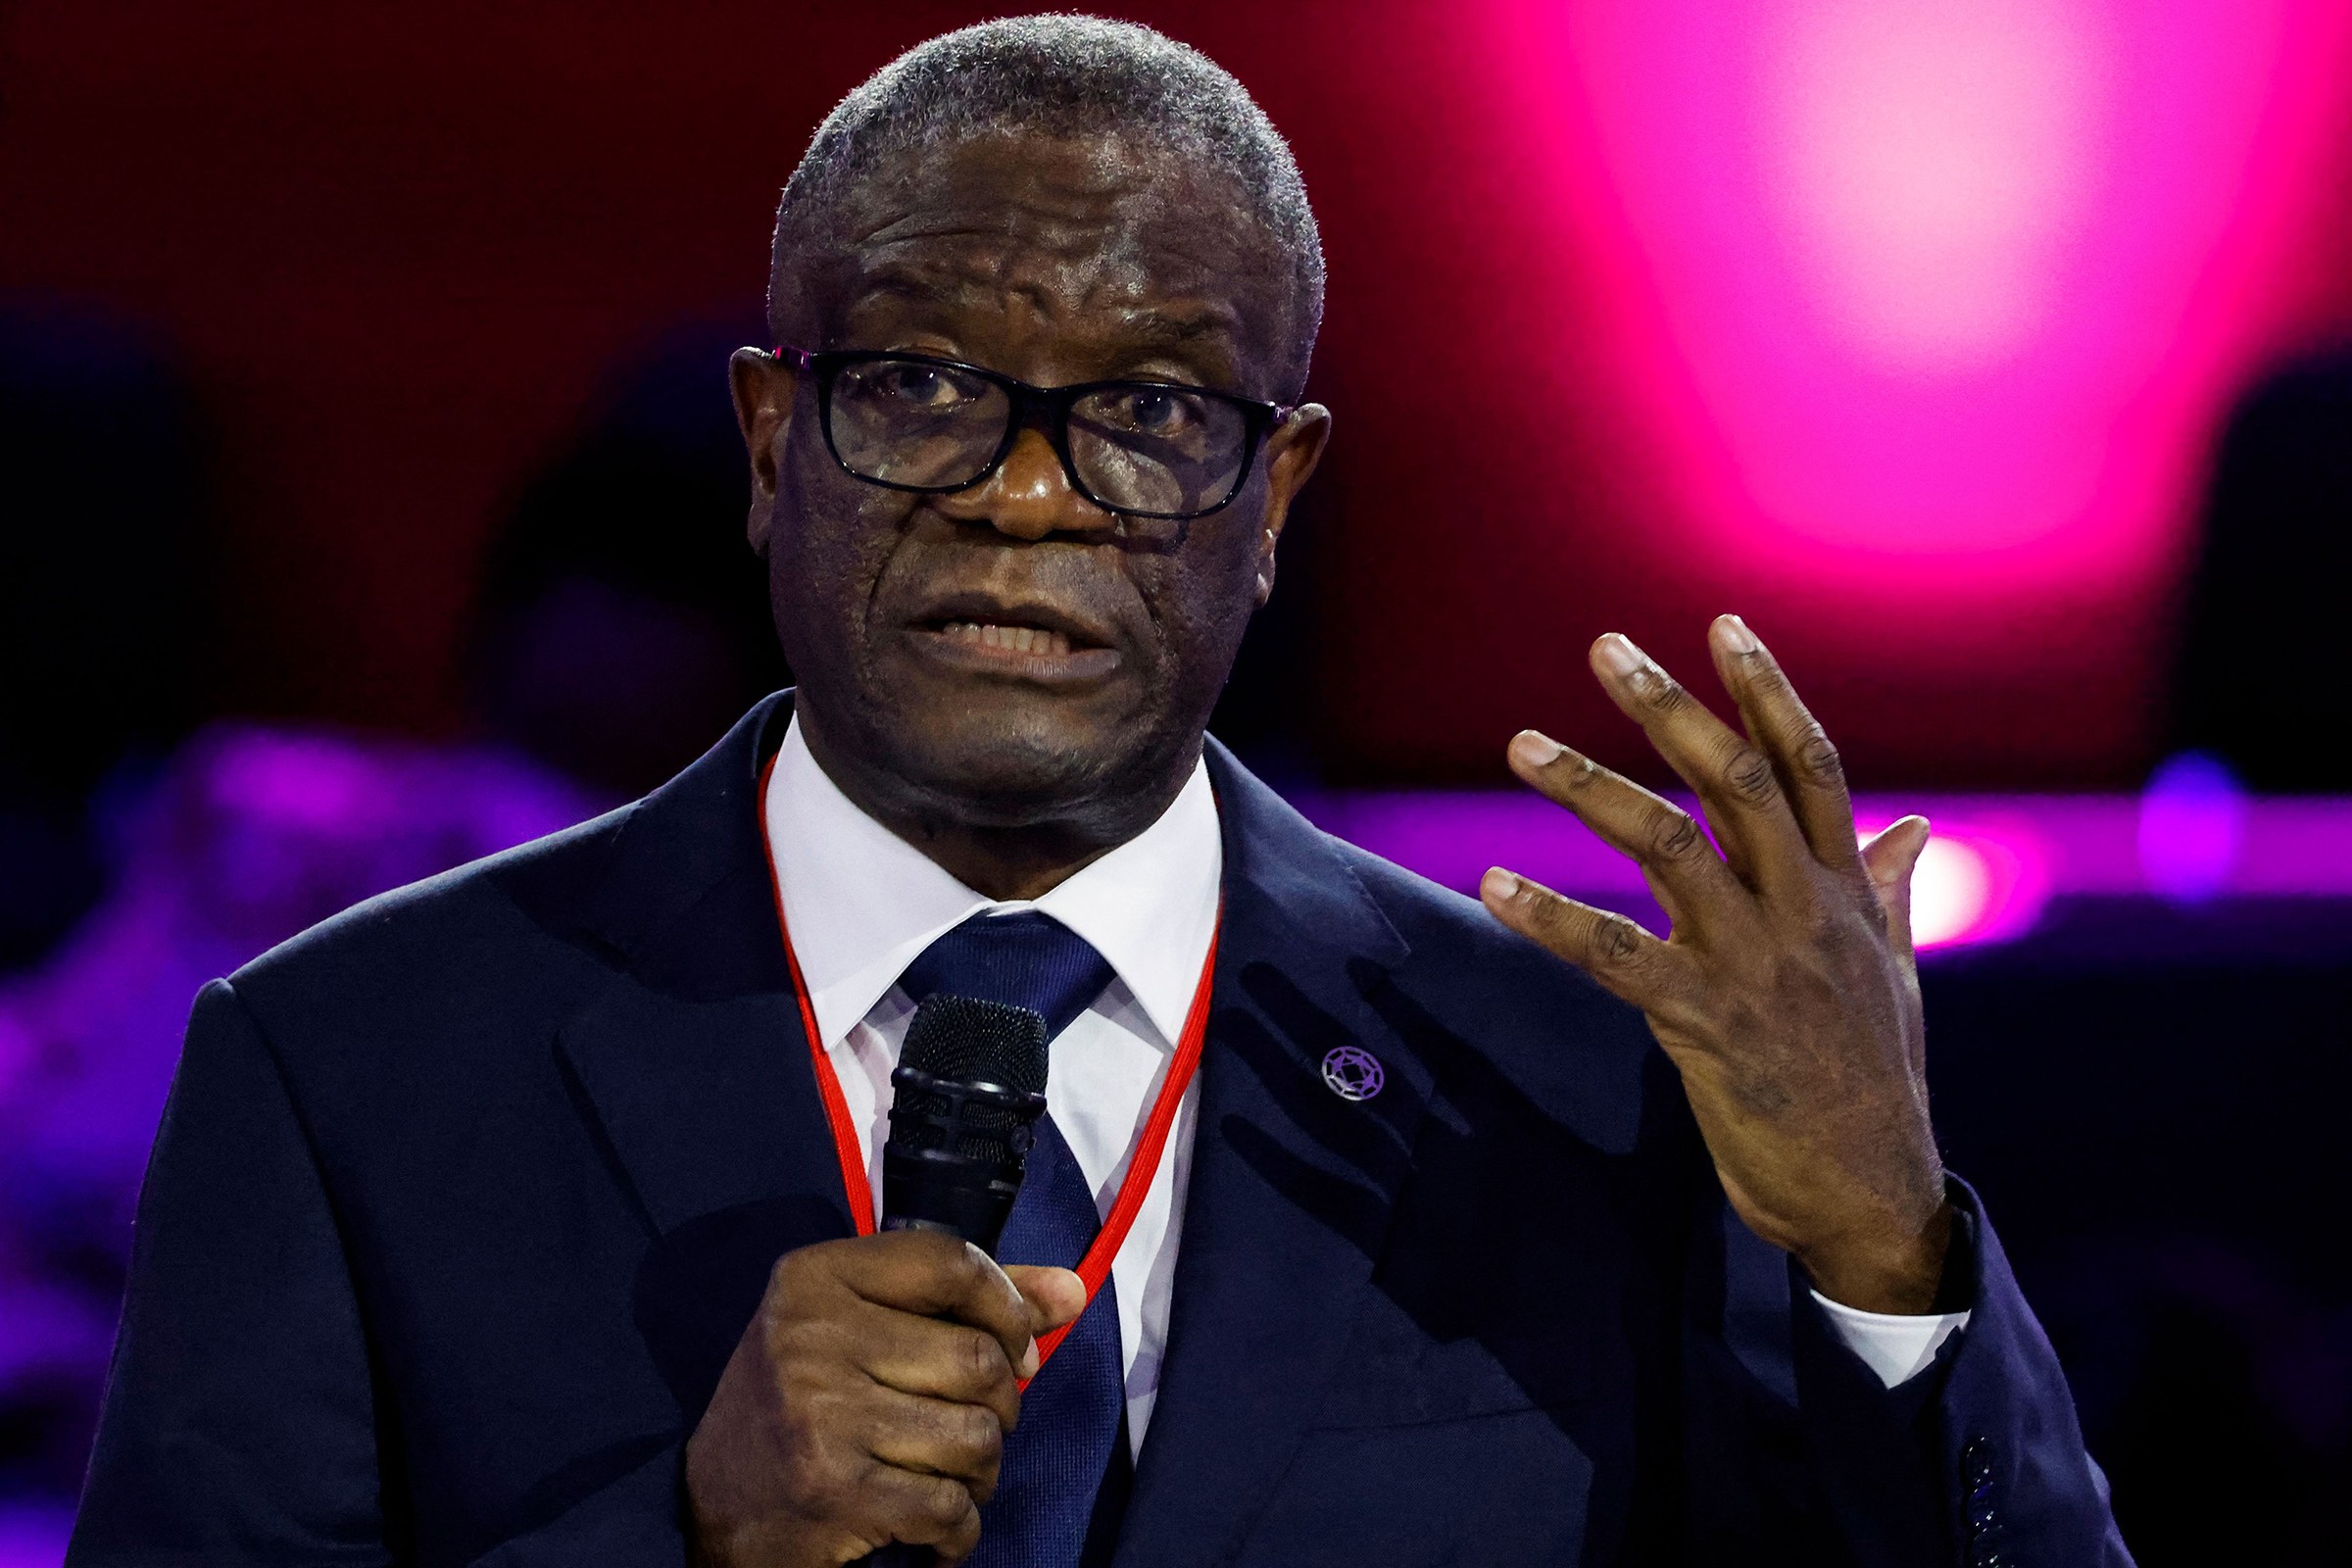 Nobel Peace Prize Dr. Denis Mukwege delivers a speech during the Generation Equality Forum on June 30, 2021. (Ludovic Marin—AFP/Getty Images)